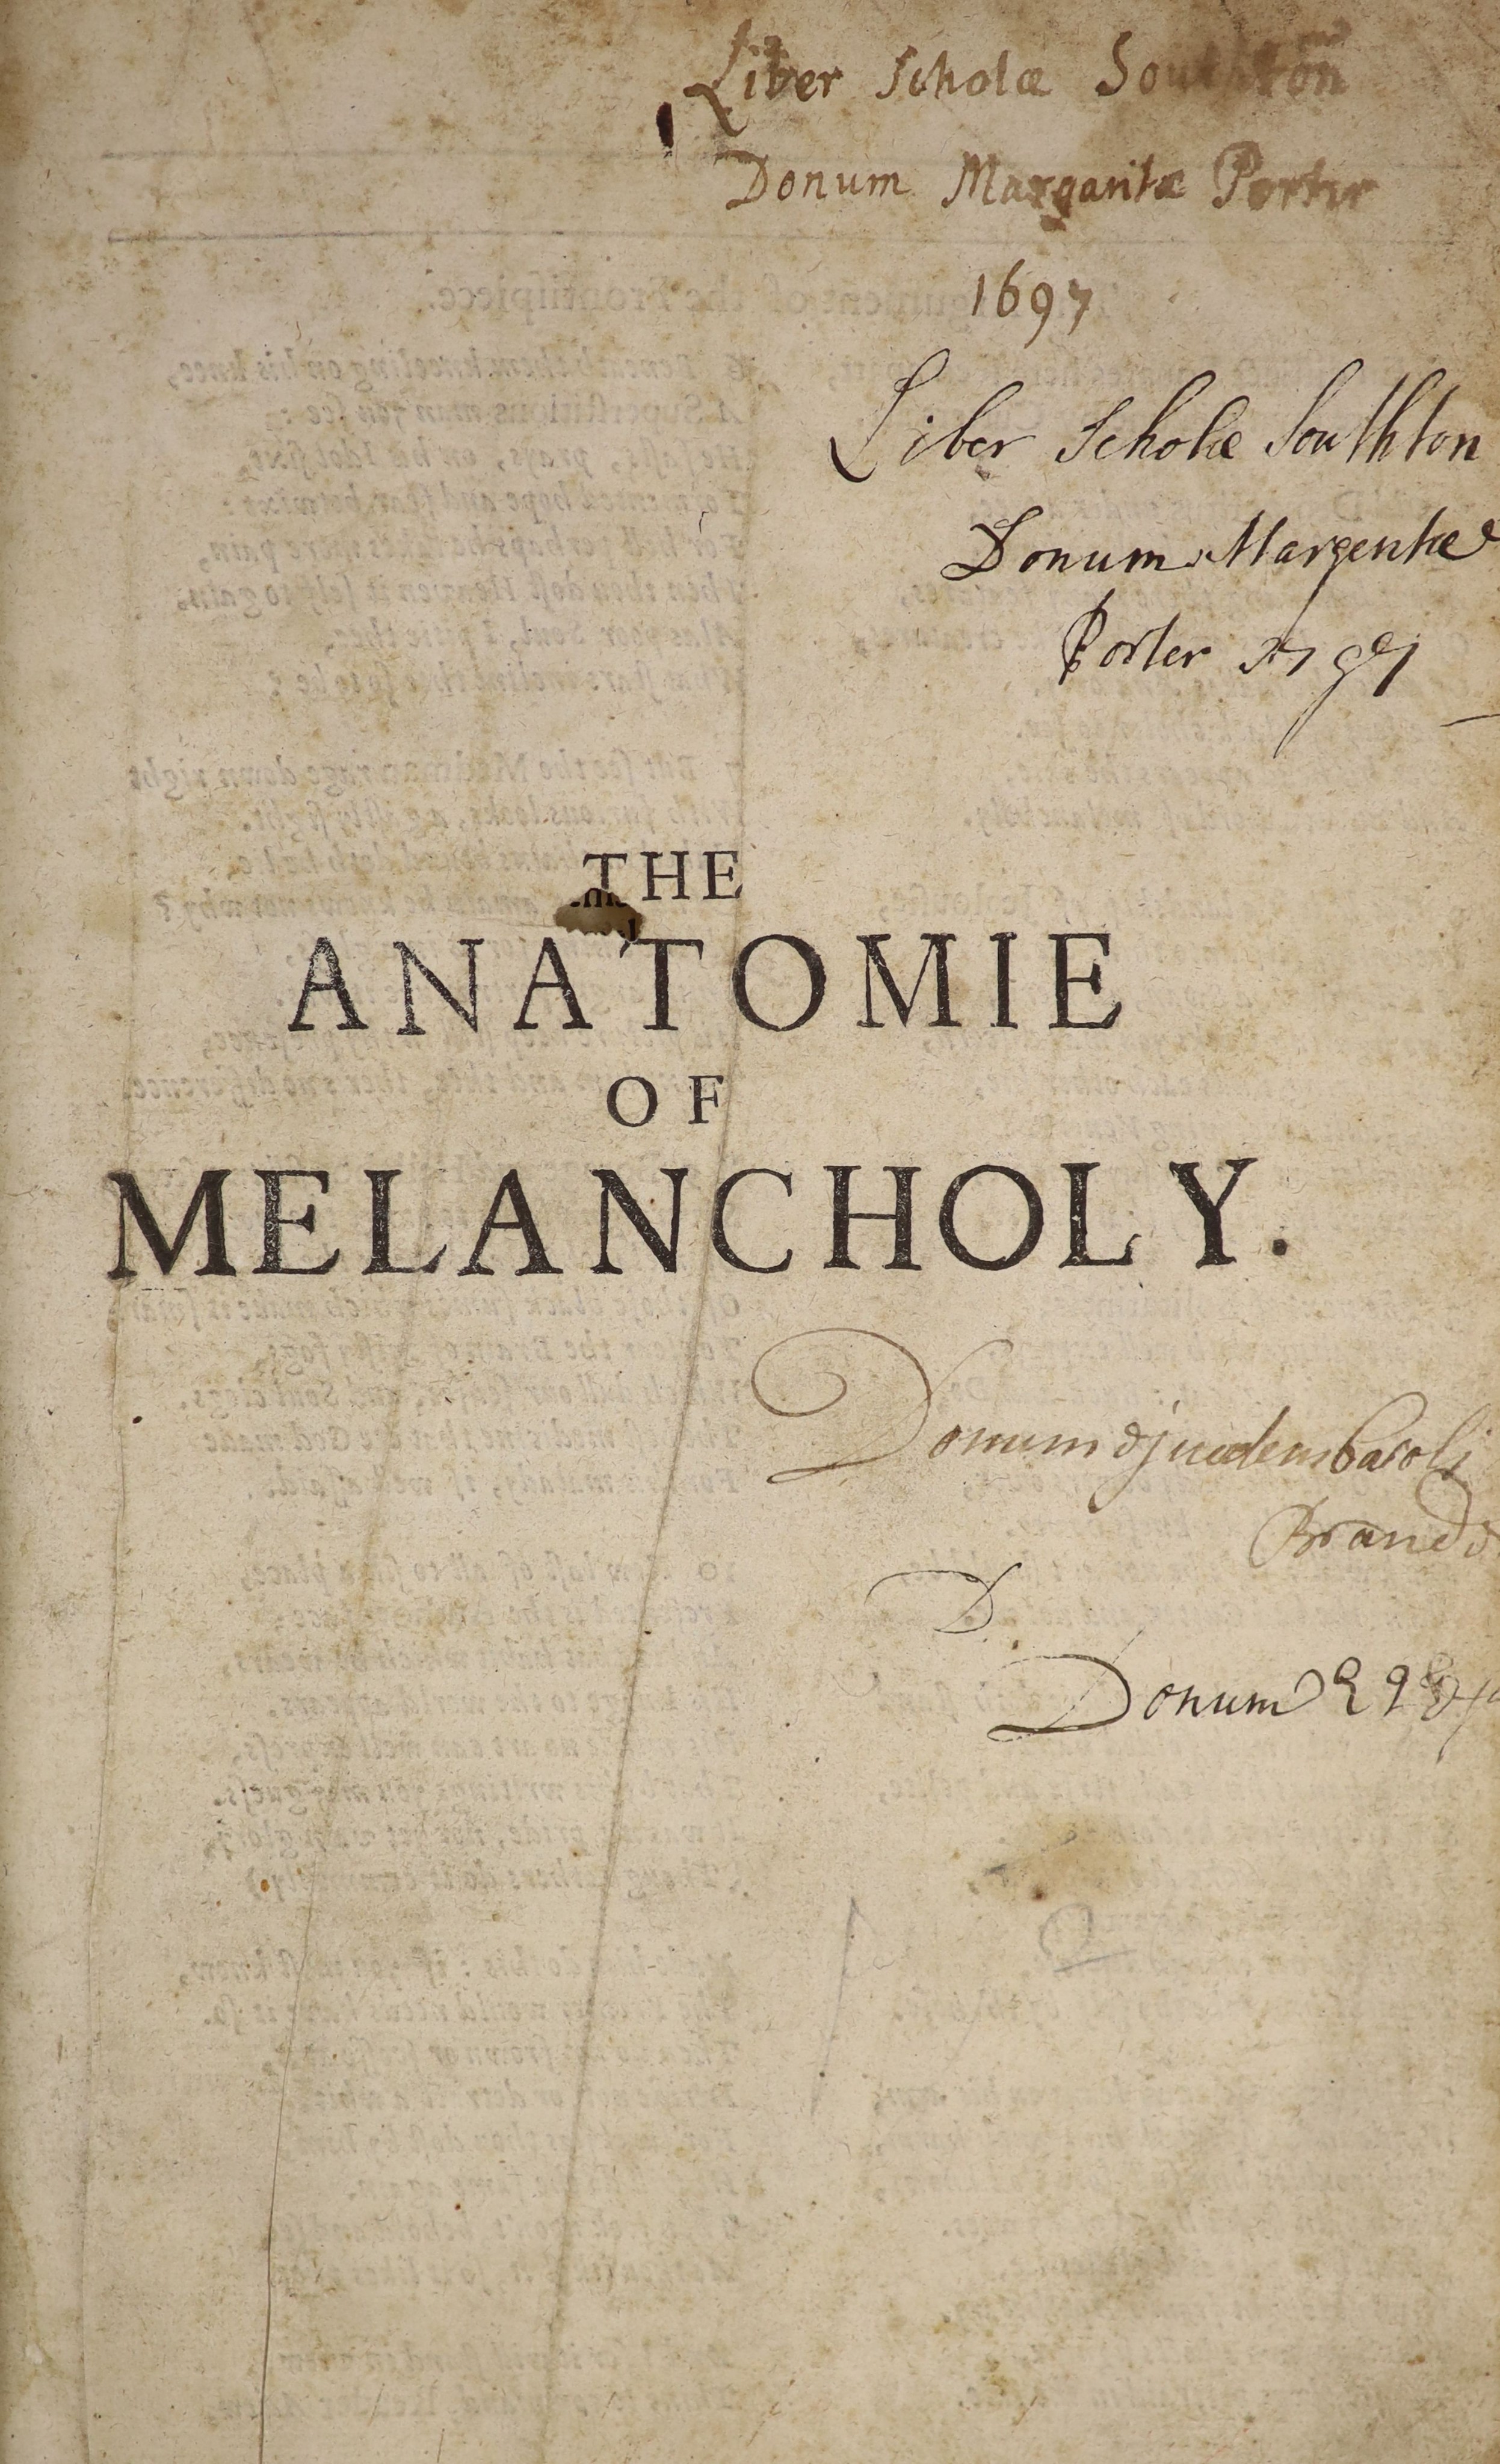 [Burton, Robert - The Anatomie of Melancholy] i.e. lacks pictorial engraved title, (half title present - with 'The Argument of the Frontispiece' on verso). 6th (revised) edition.